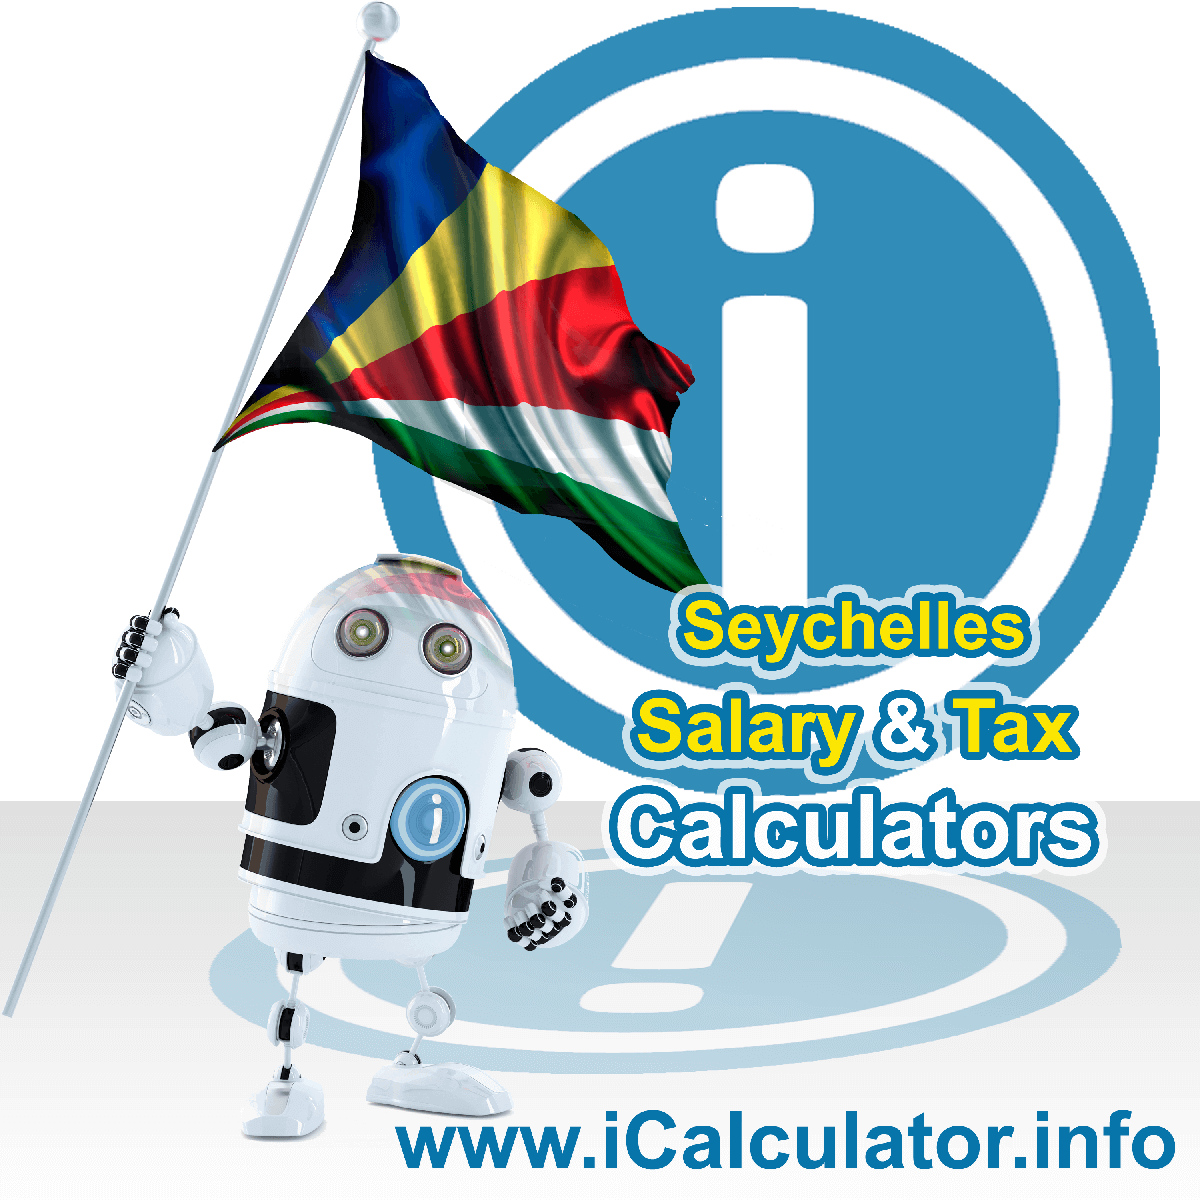 Seychelles Tax Calculator. This image shows the Seychelles flag and information relating to the tax formula for the Seychelles Salary Calculator